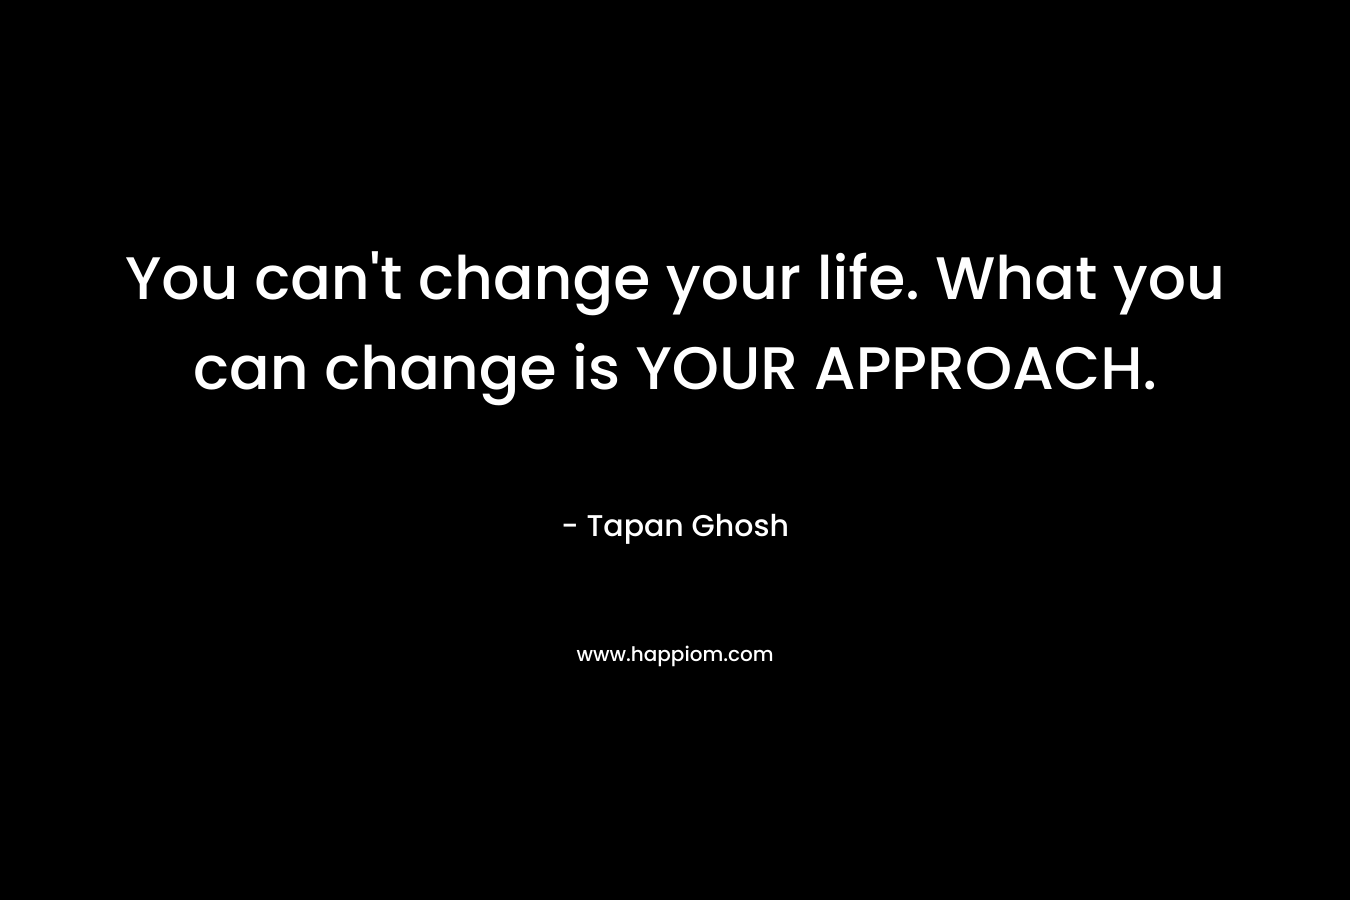 You can’t change your life. What you can change is YOUR APPROACH. – Tapan Ghosh